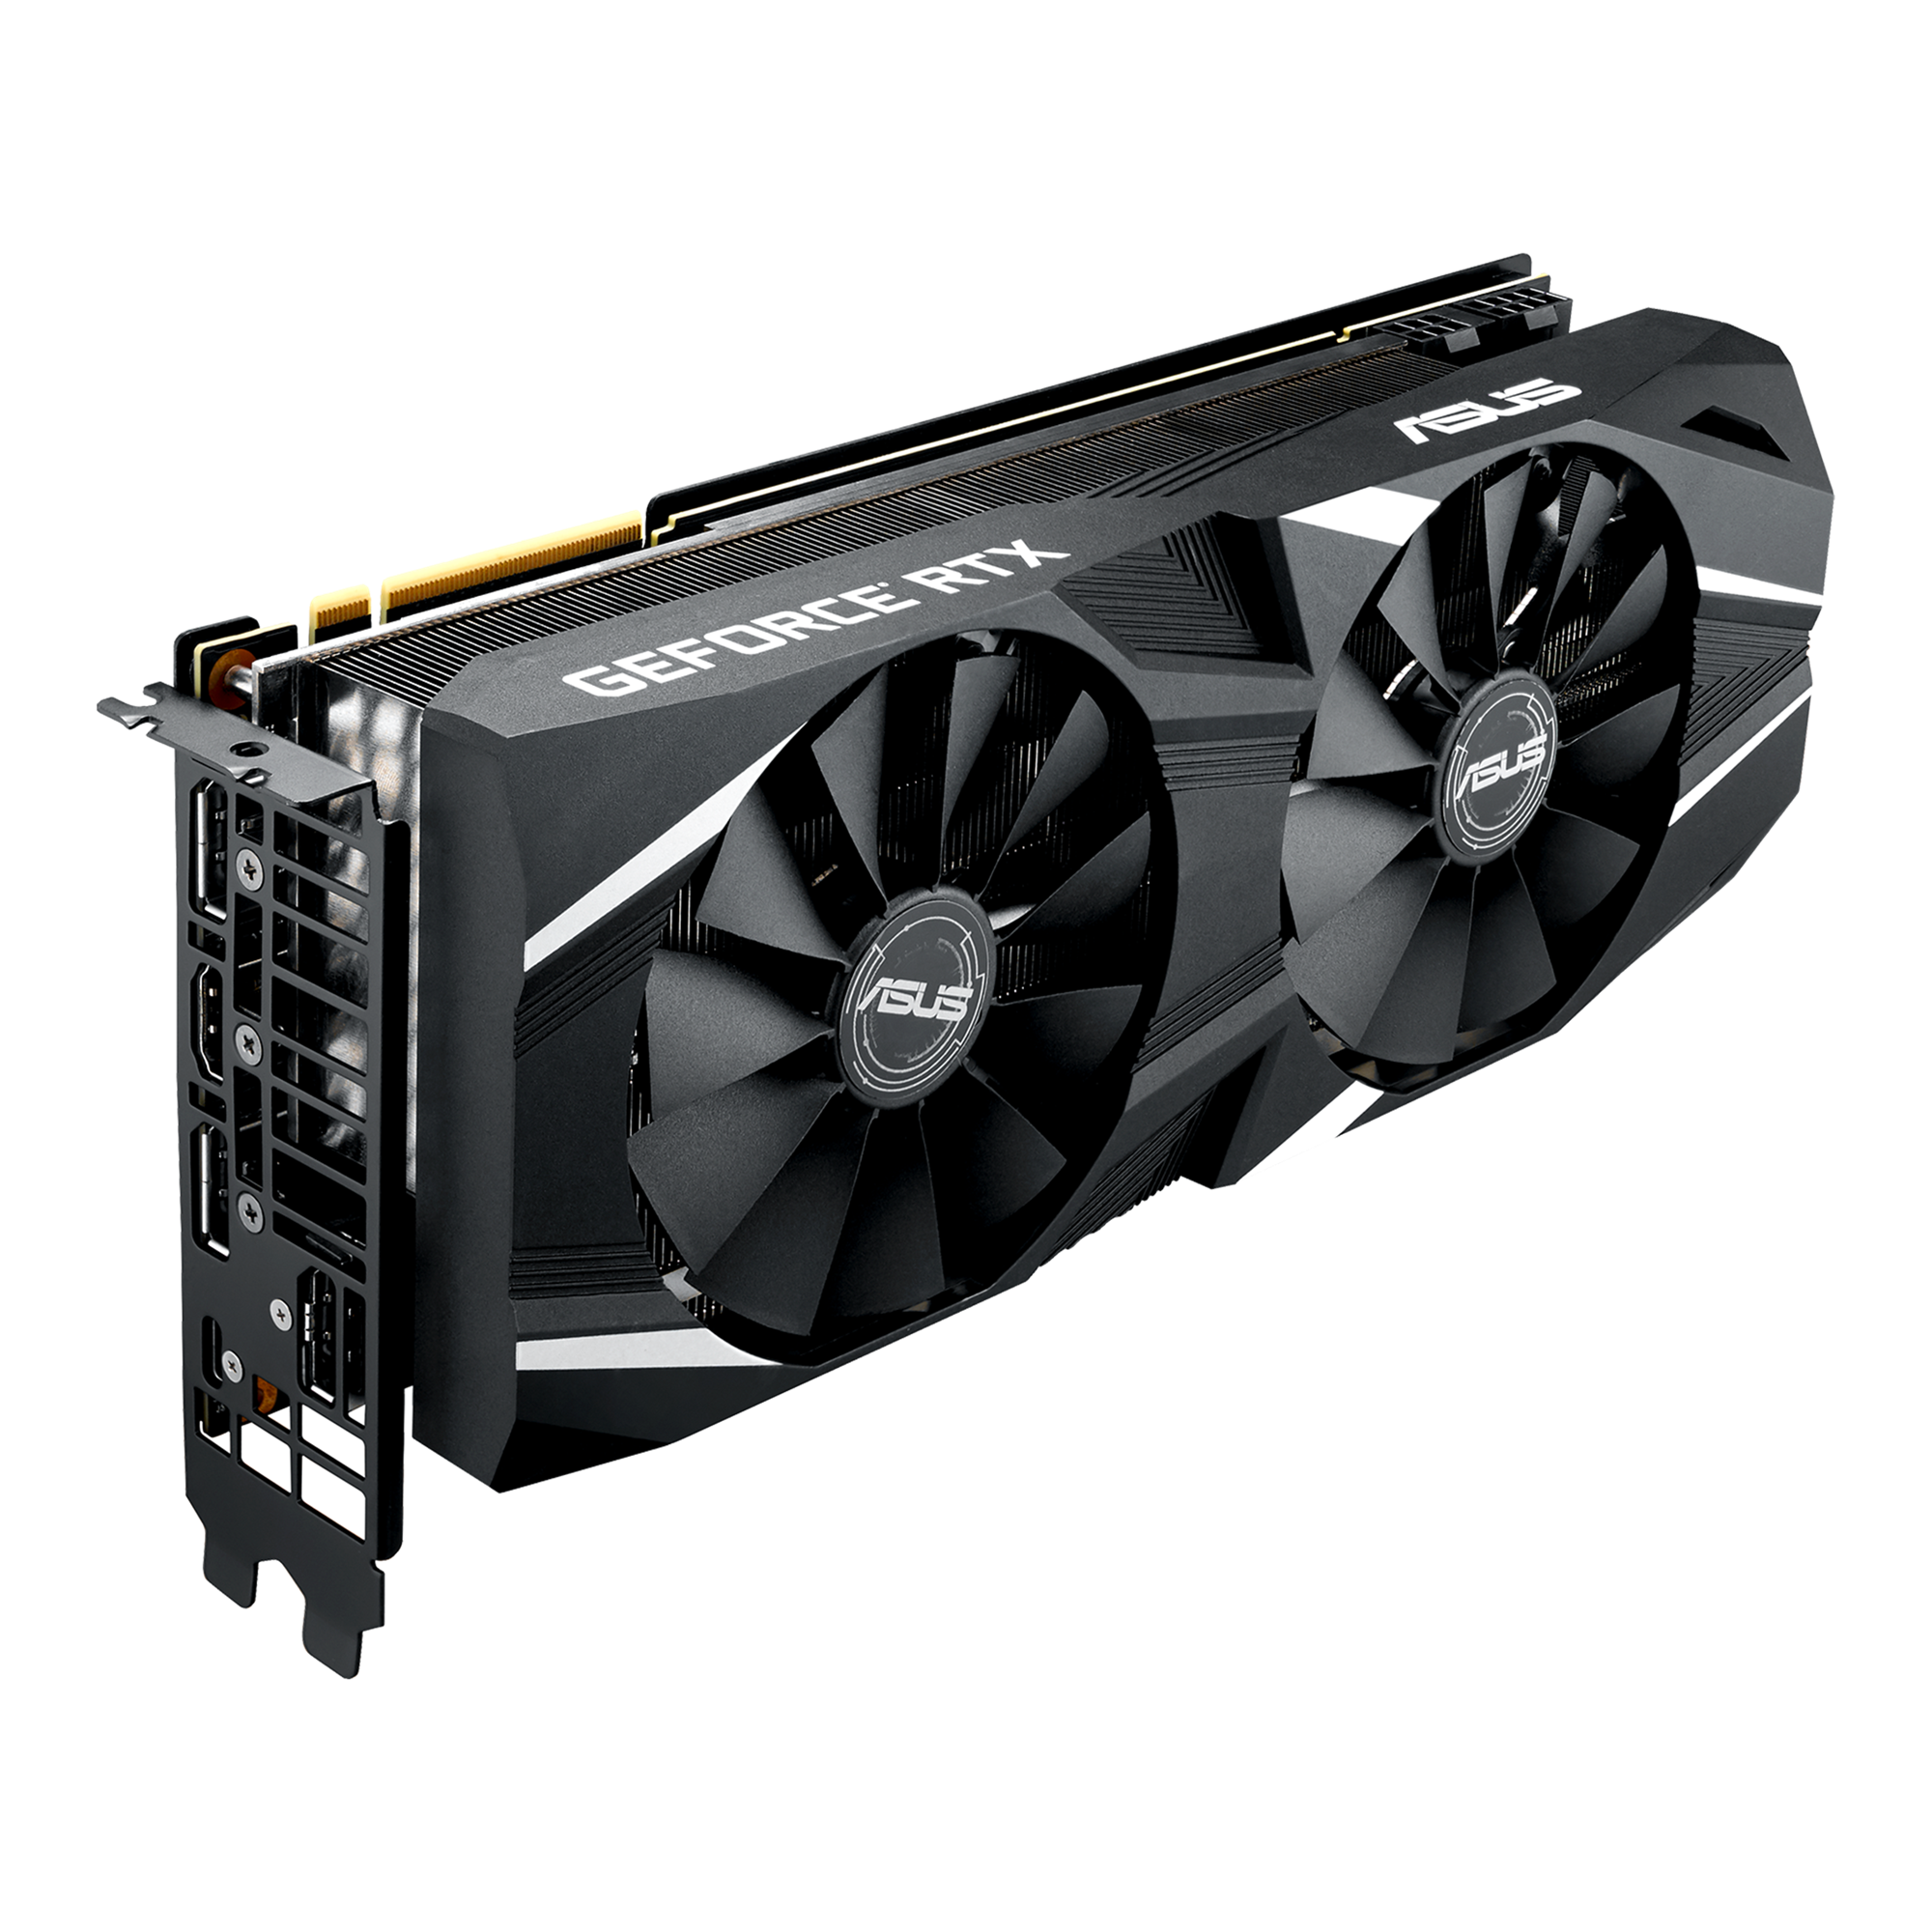 ASUS GeForce RTX 2080 Advanced Overclocked 8G GDDR6 Dual-Fan Edition VR Ready HDMI DP USB Type-C Graphics Card DUAL-RTX-2080-A8G